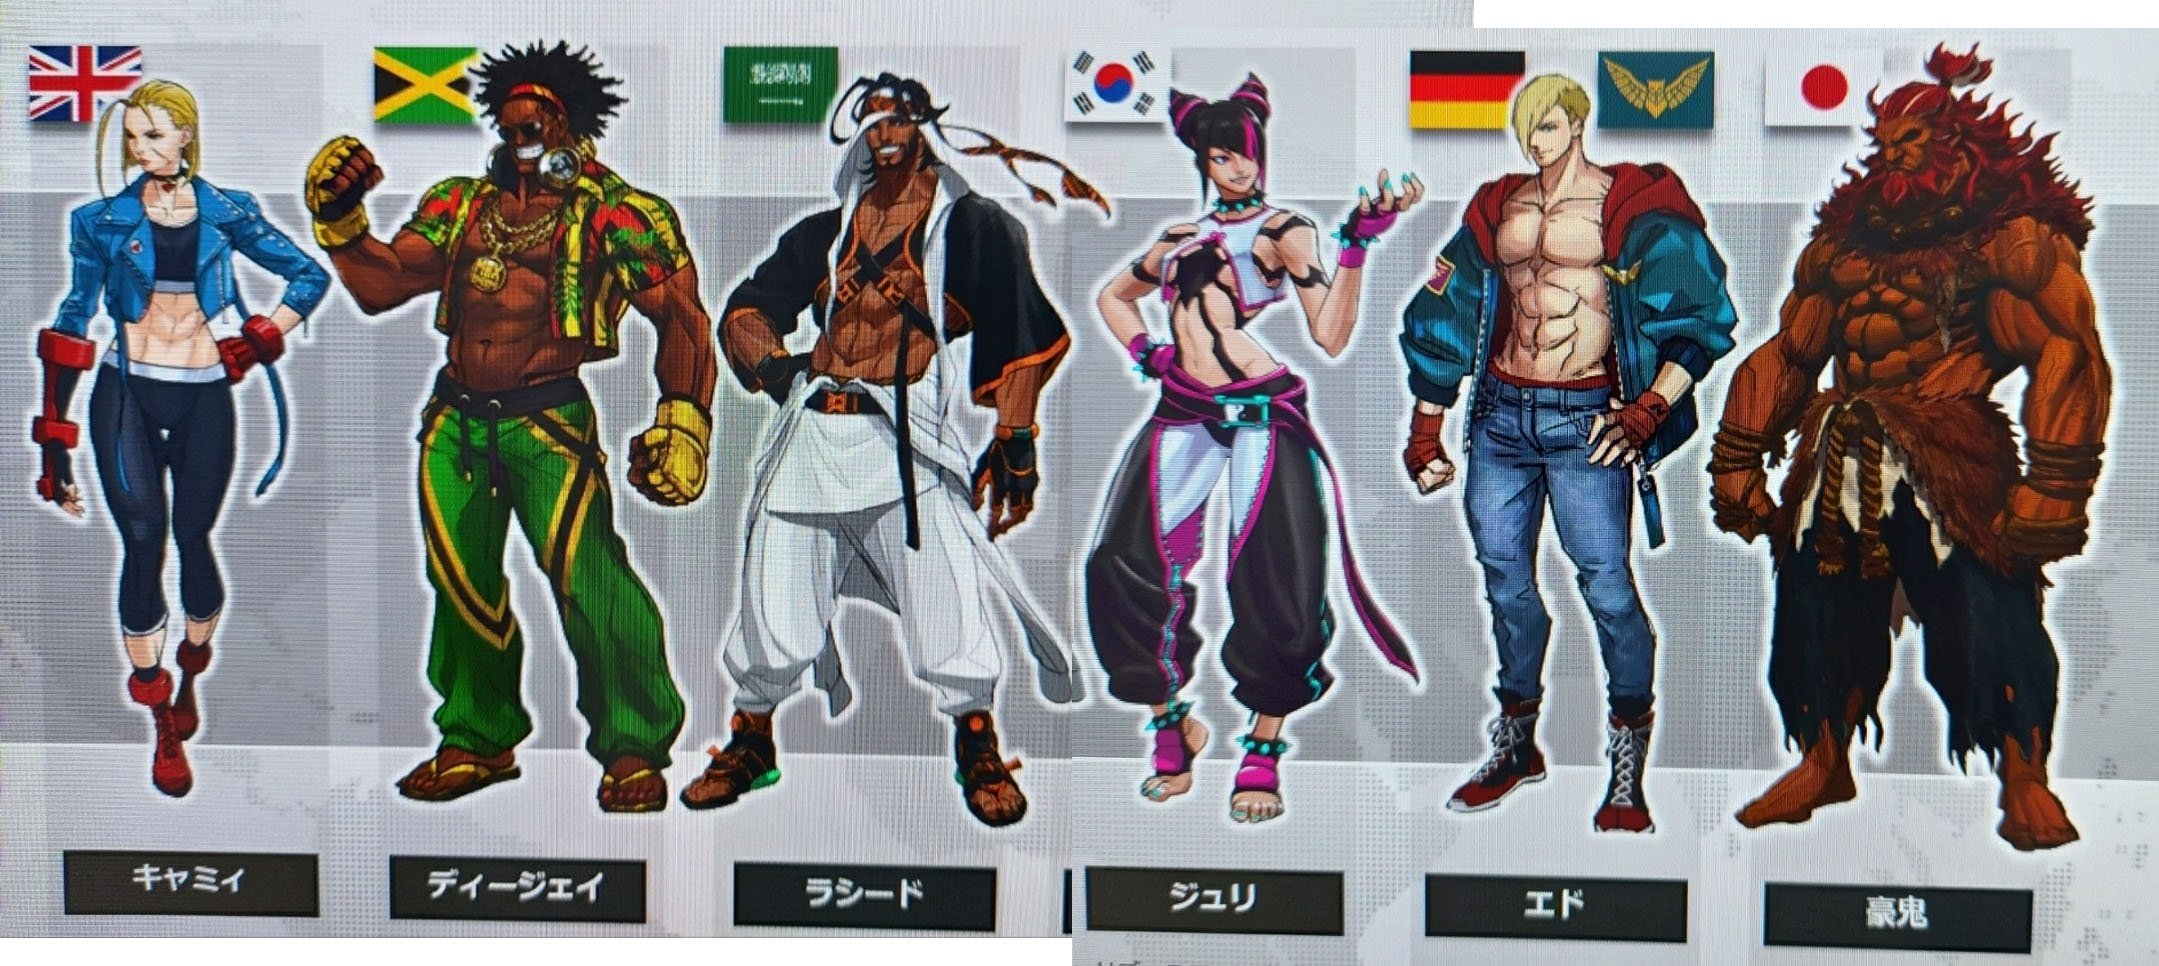 All of the Street Fighter 6 characters revealed so far